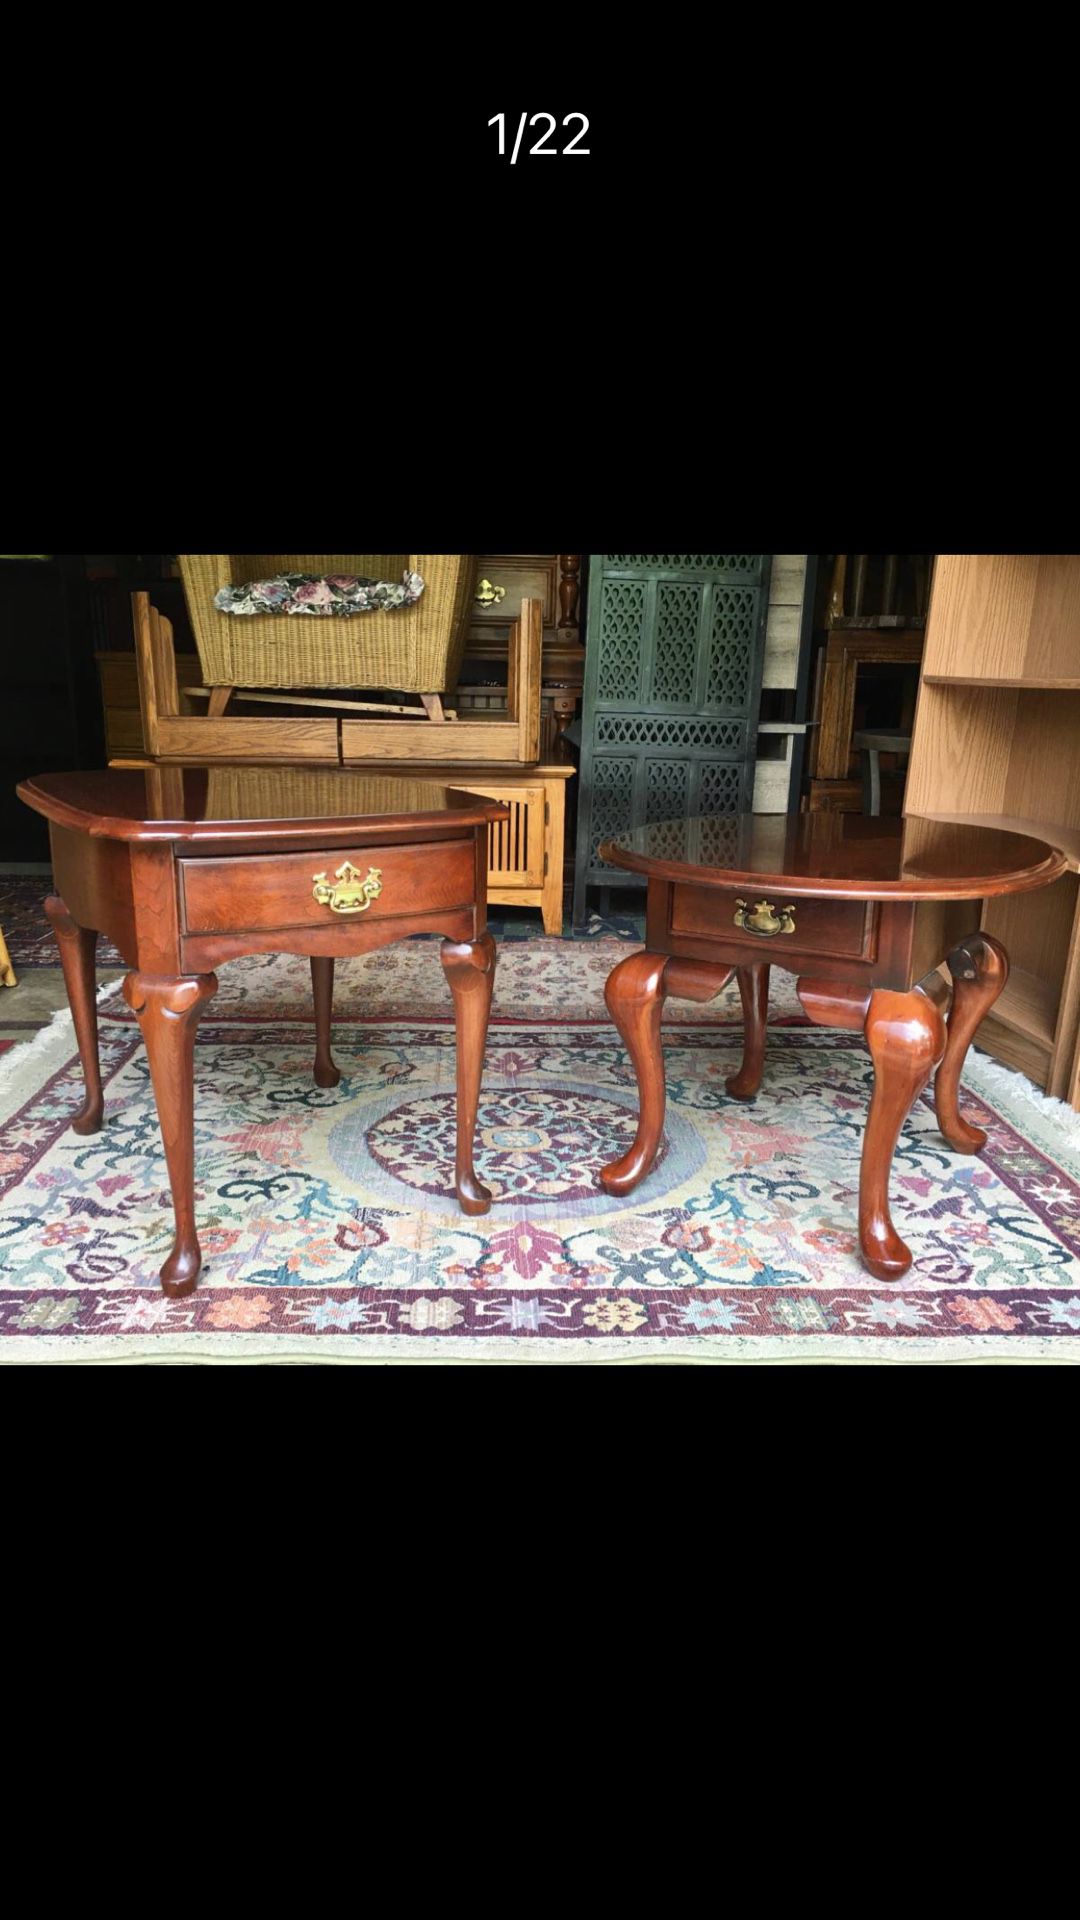 2 Chippendale Mahogany End Side Tables - See Description